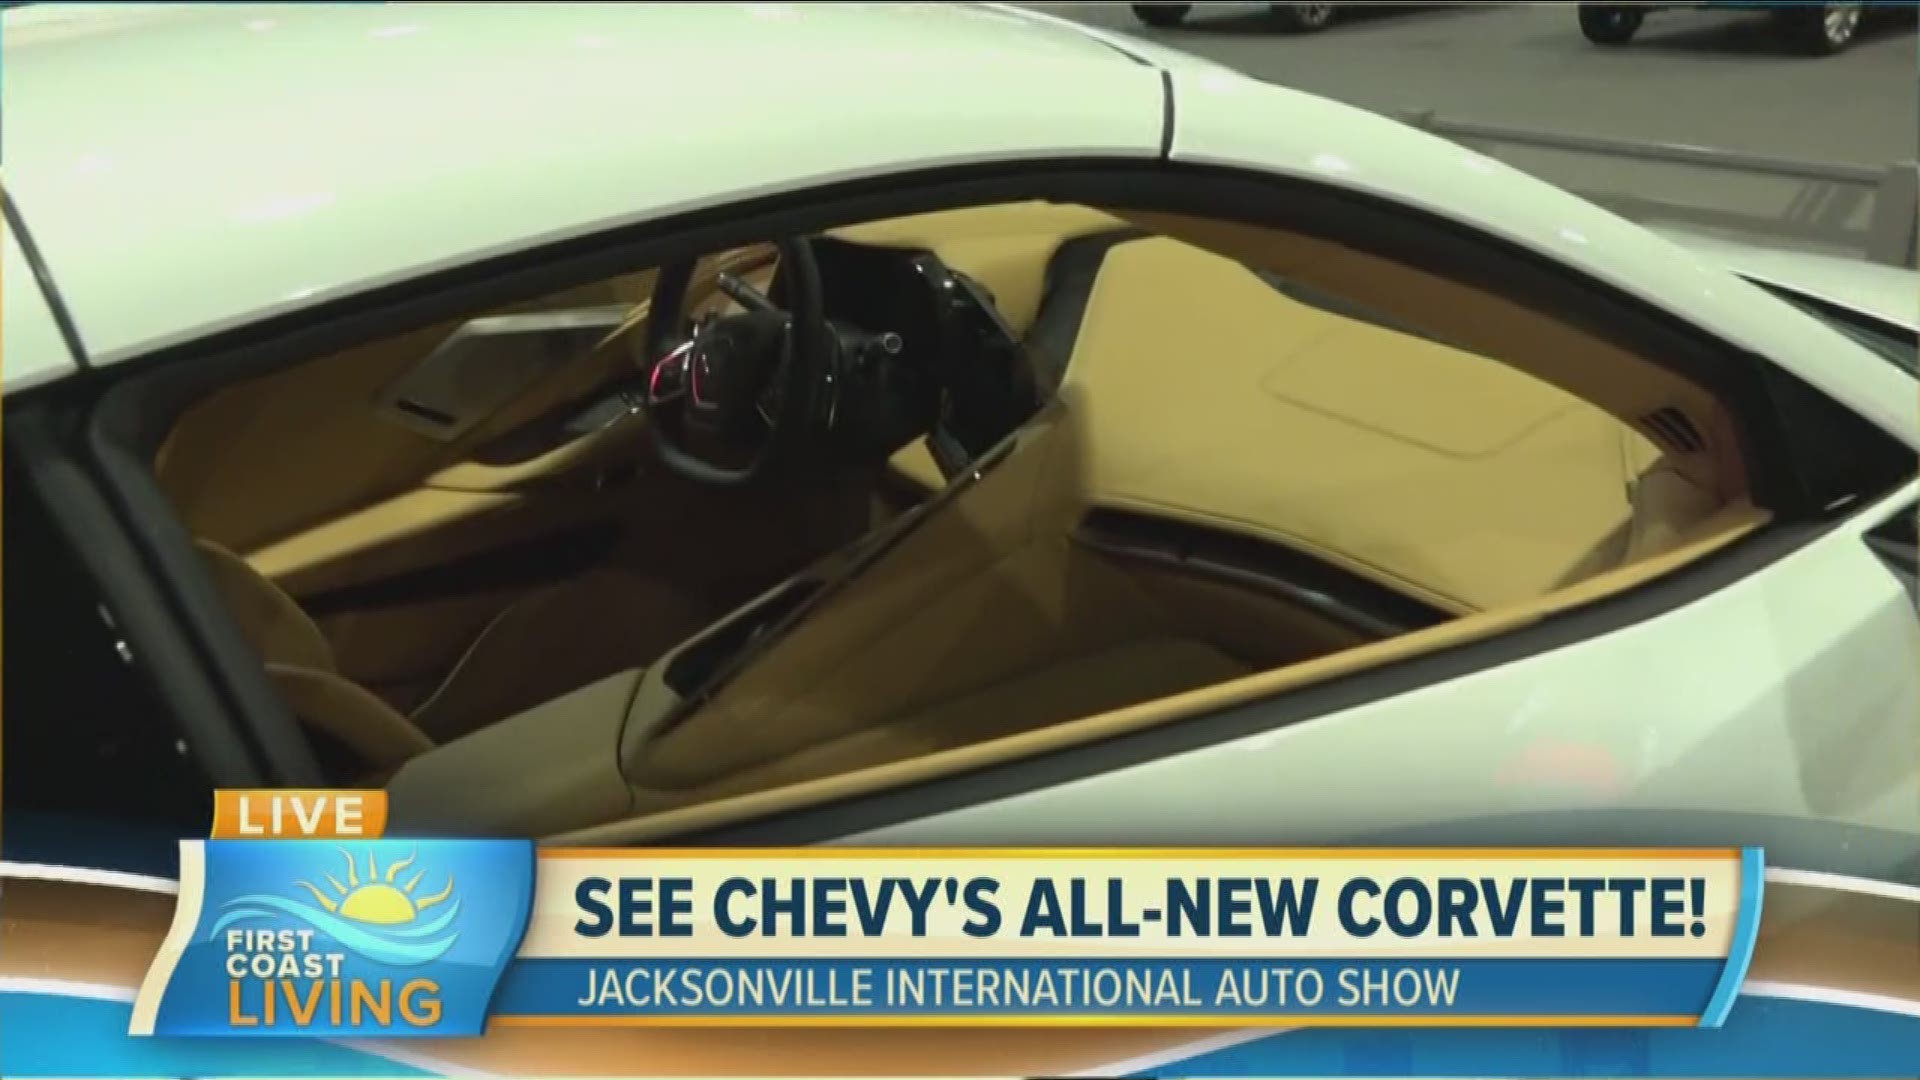 Get a peek at what's new at the Chevy display this year!